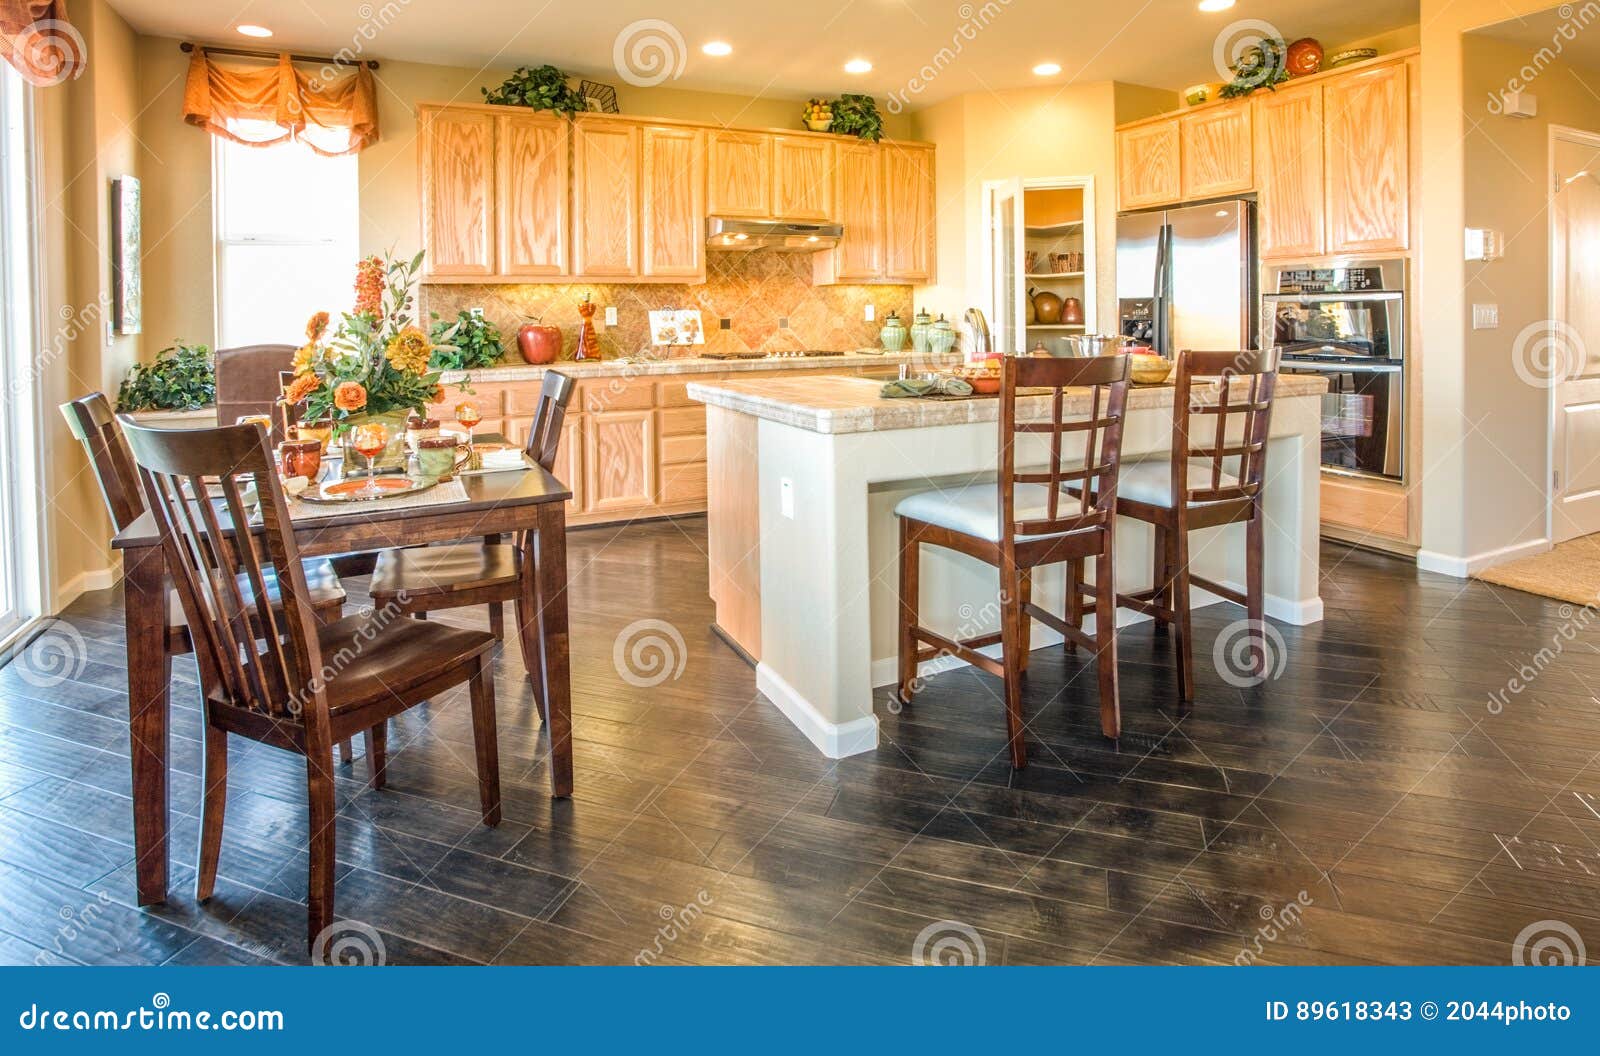 residential home kitchen and nook